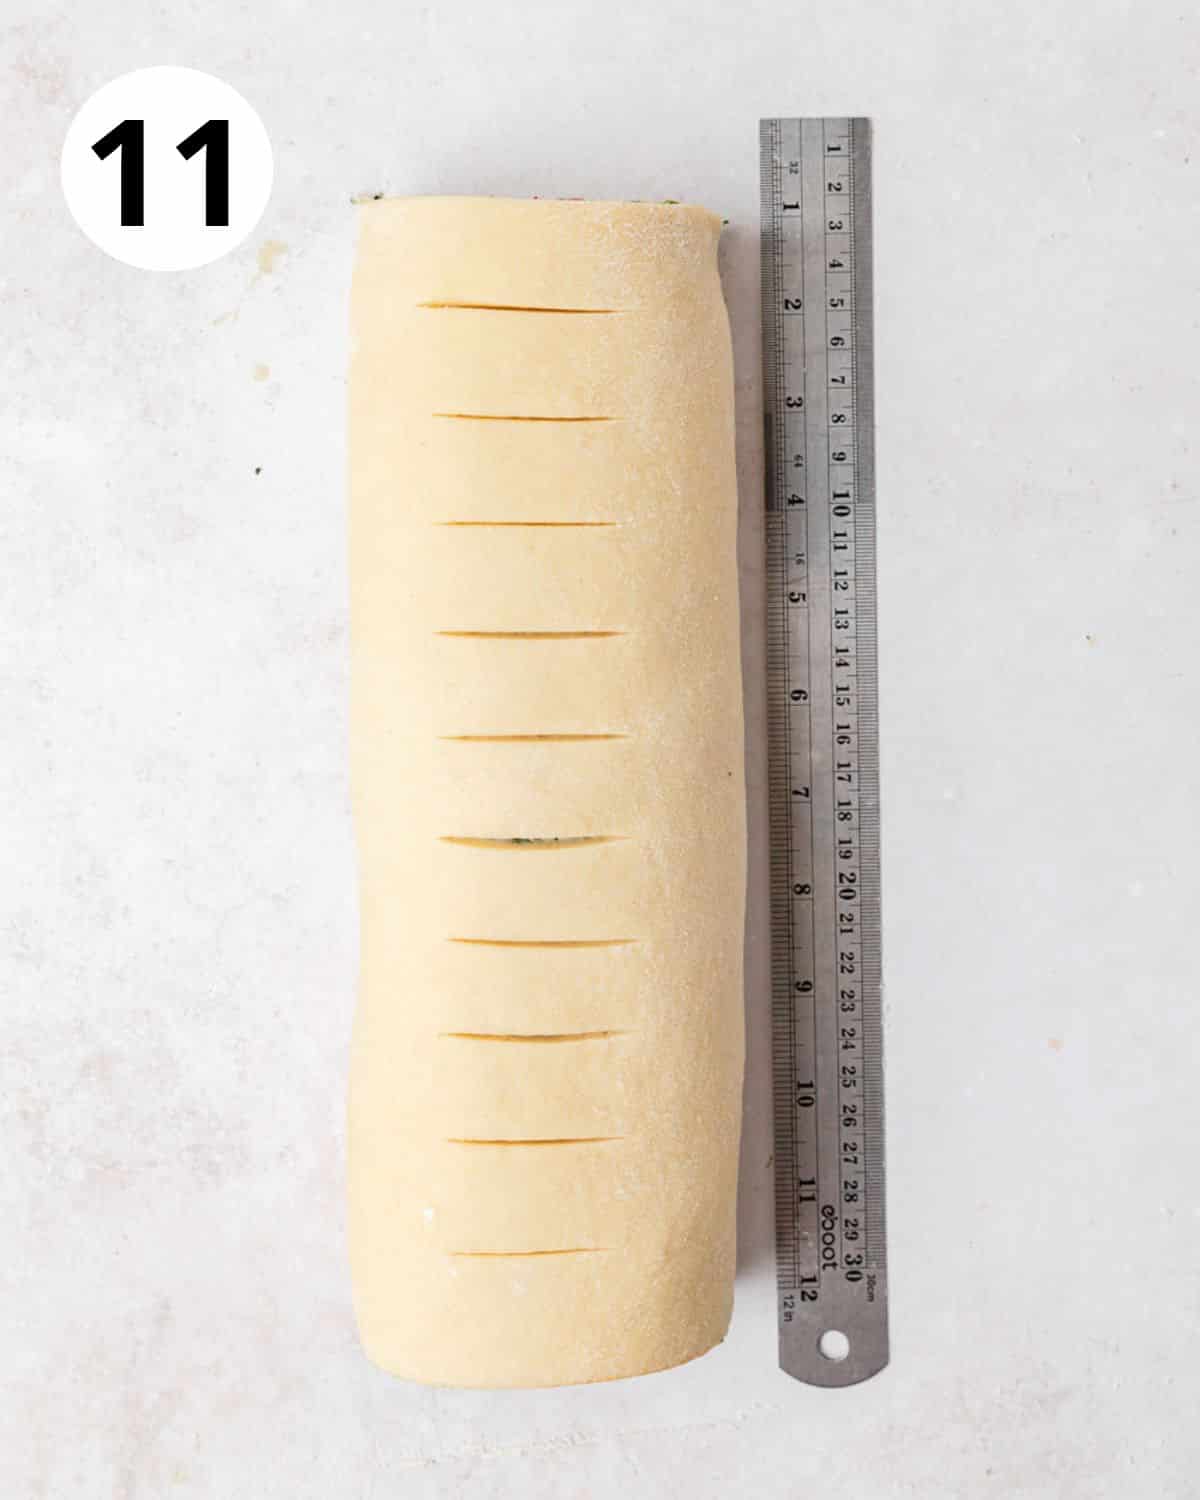 measuring rolls before cutting into even slices.